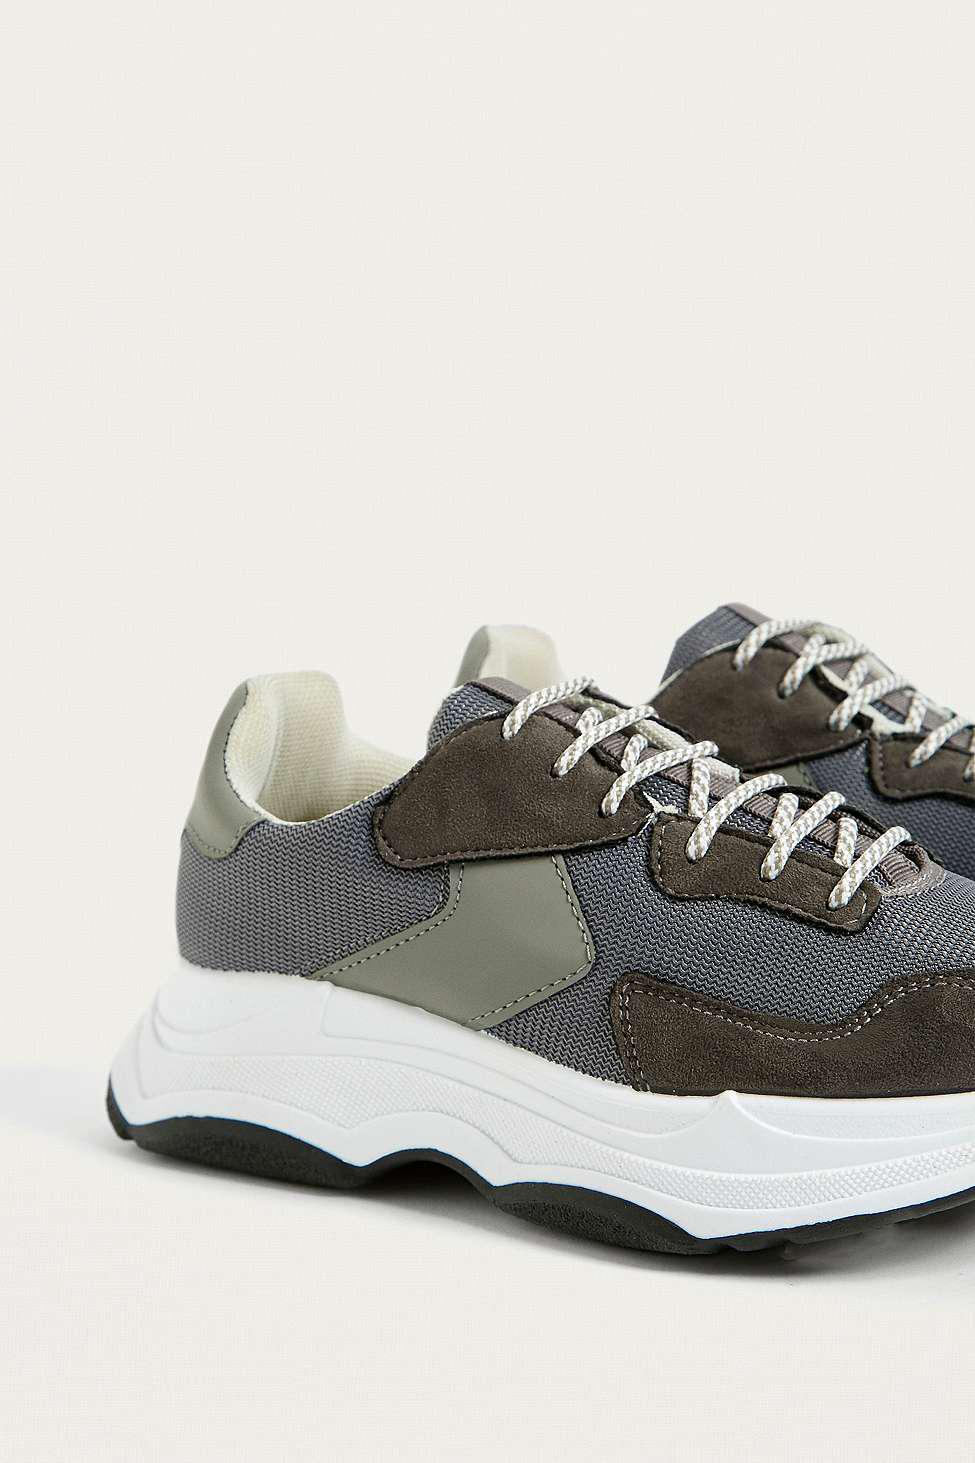 Urban Outfitters Rubber Uo Track Chunky Trainers in Grey (Grey) - Lyst